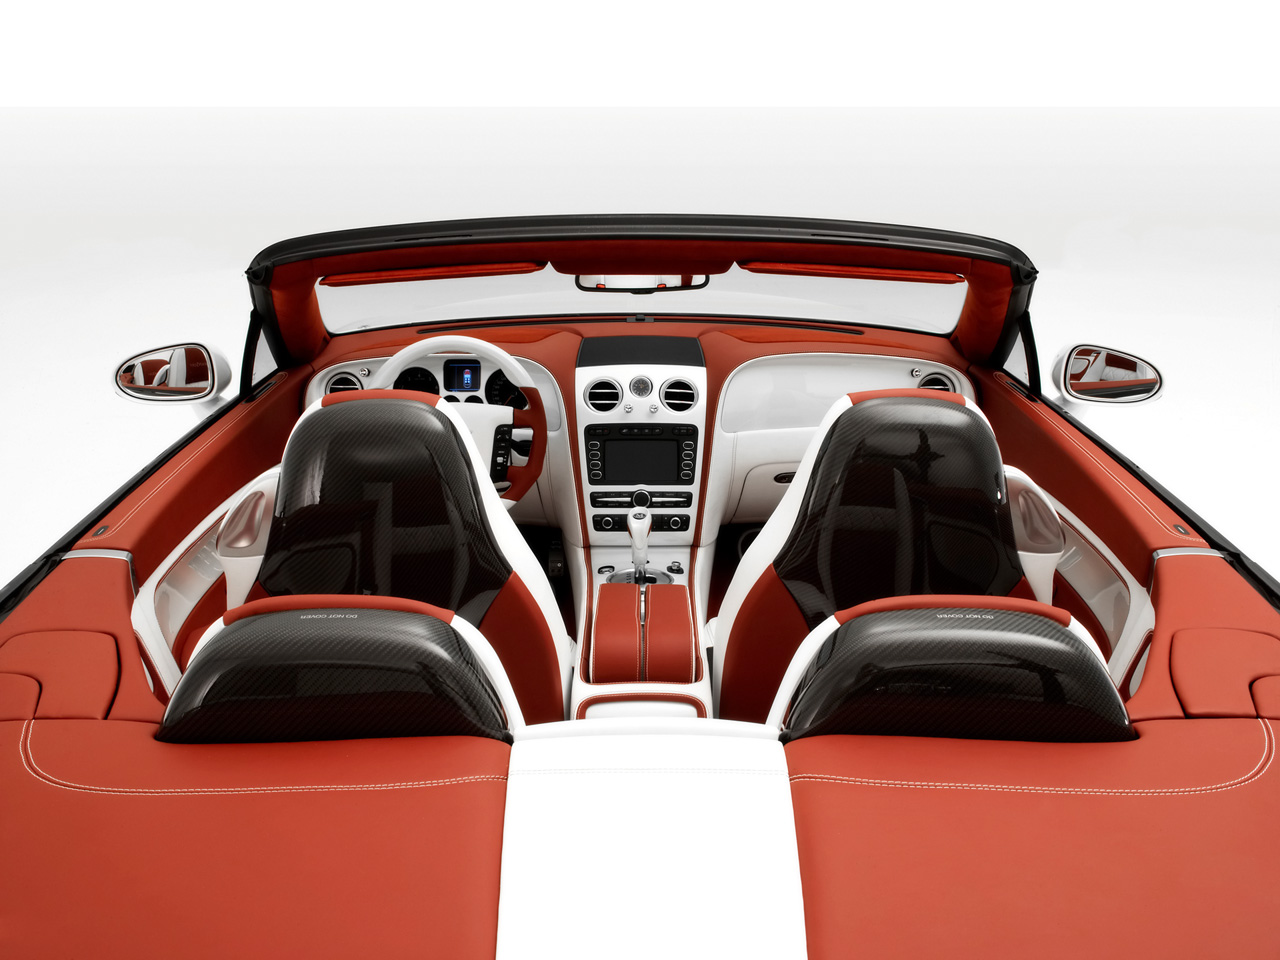 2008-le-mansory-convertible-based-on-bentley-continental-gtc-interior-top-1280x960.jpg